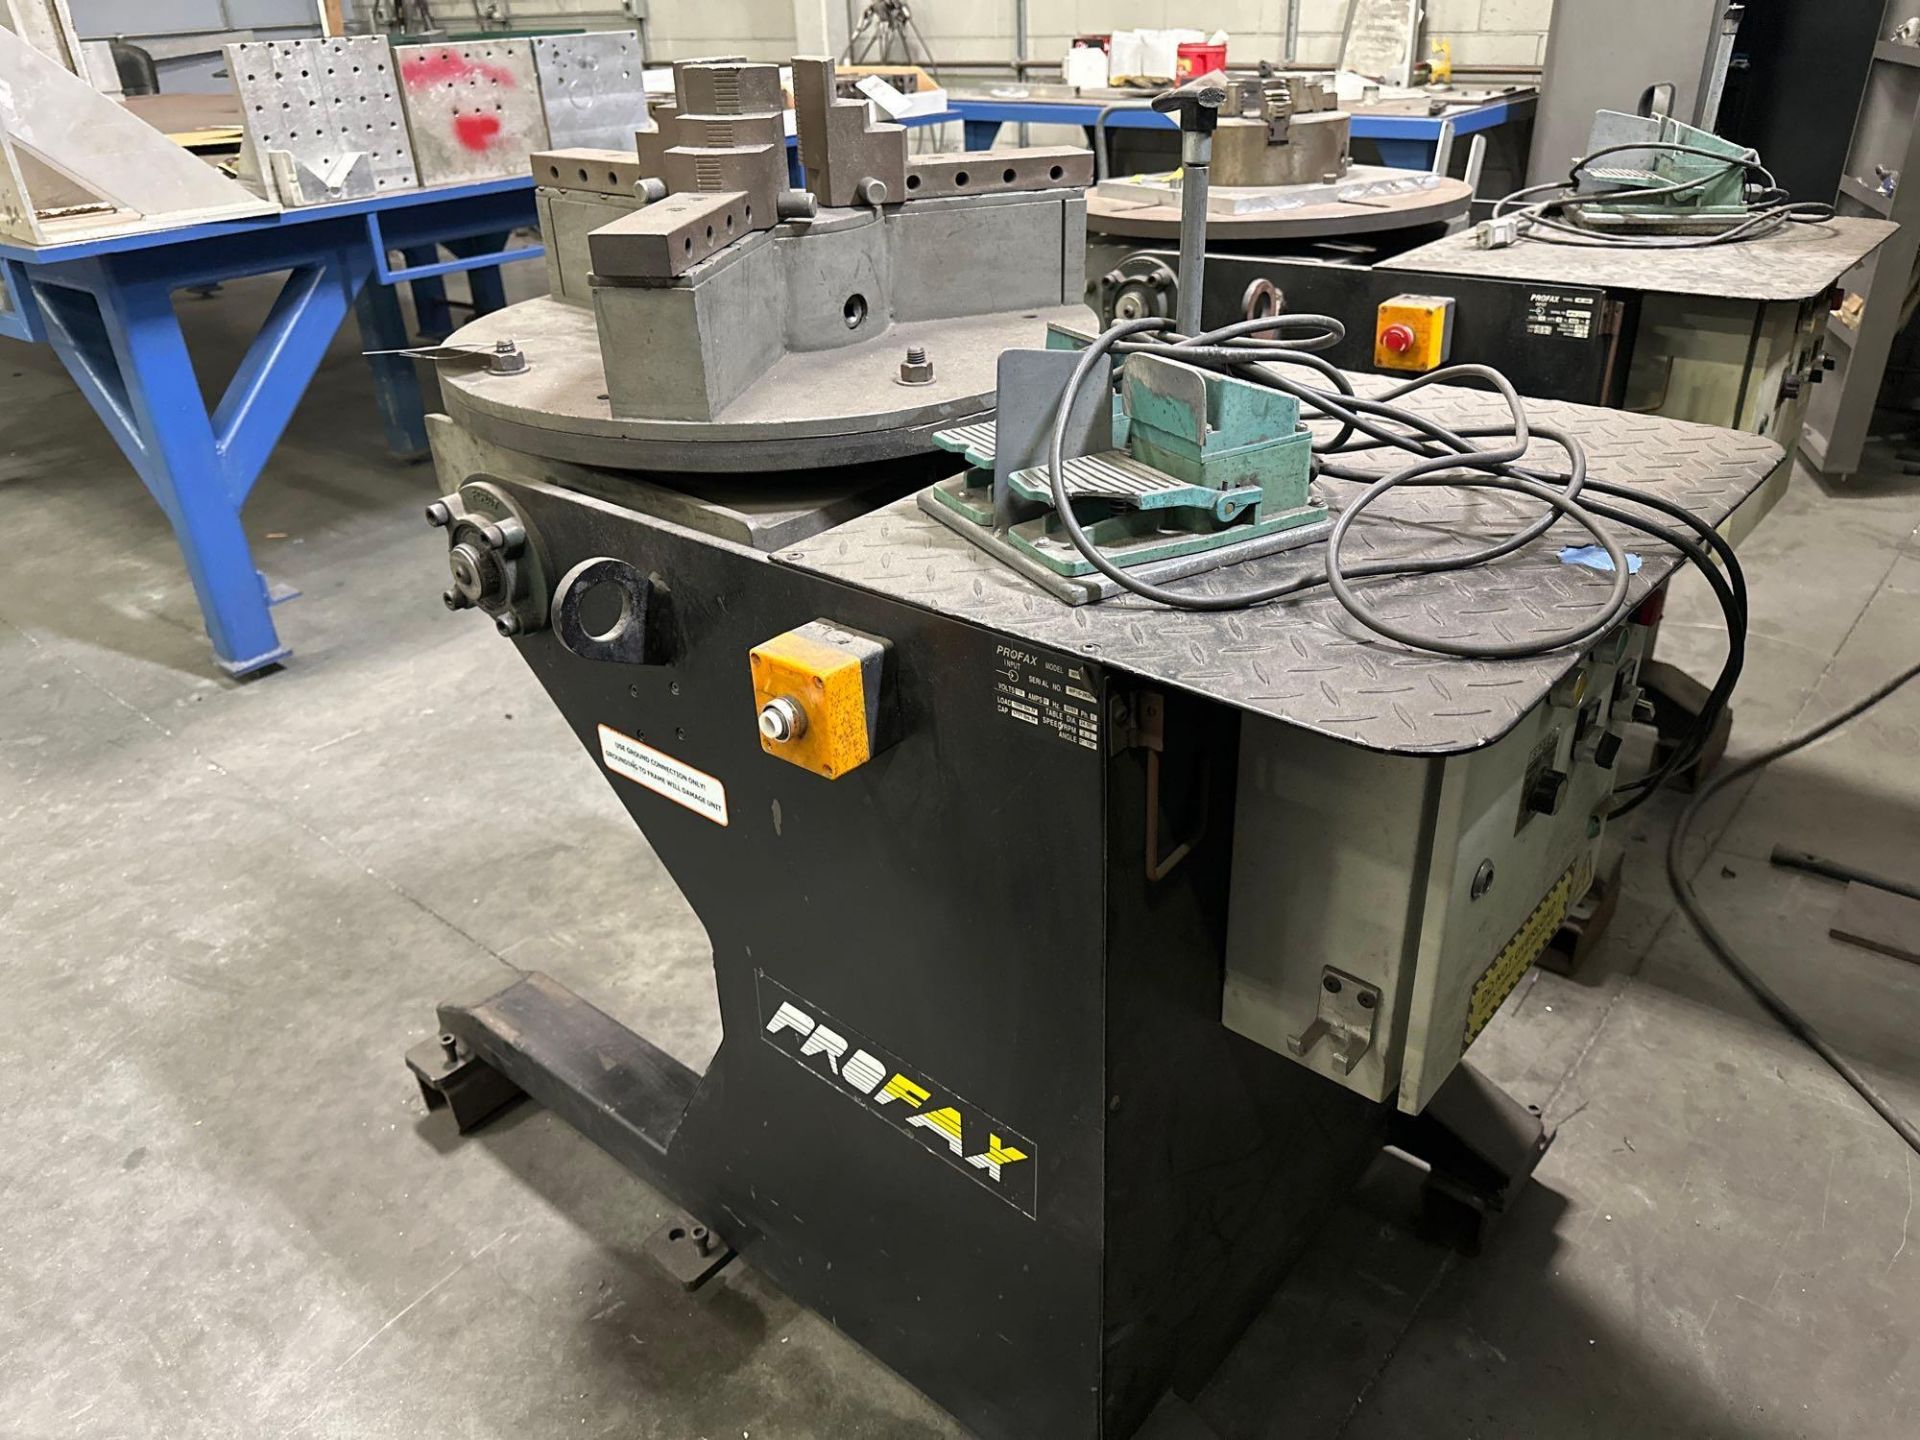 Profax WP-1000 Welding Postioner. 25.5” Table, 2 rpm, 1750lbs Cap, 0-135 Angle, s/n wp10 - 2630 - Image 5 of 7